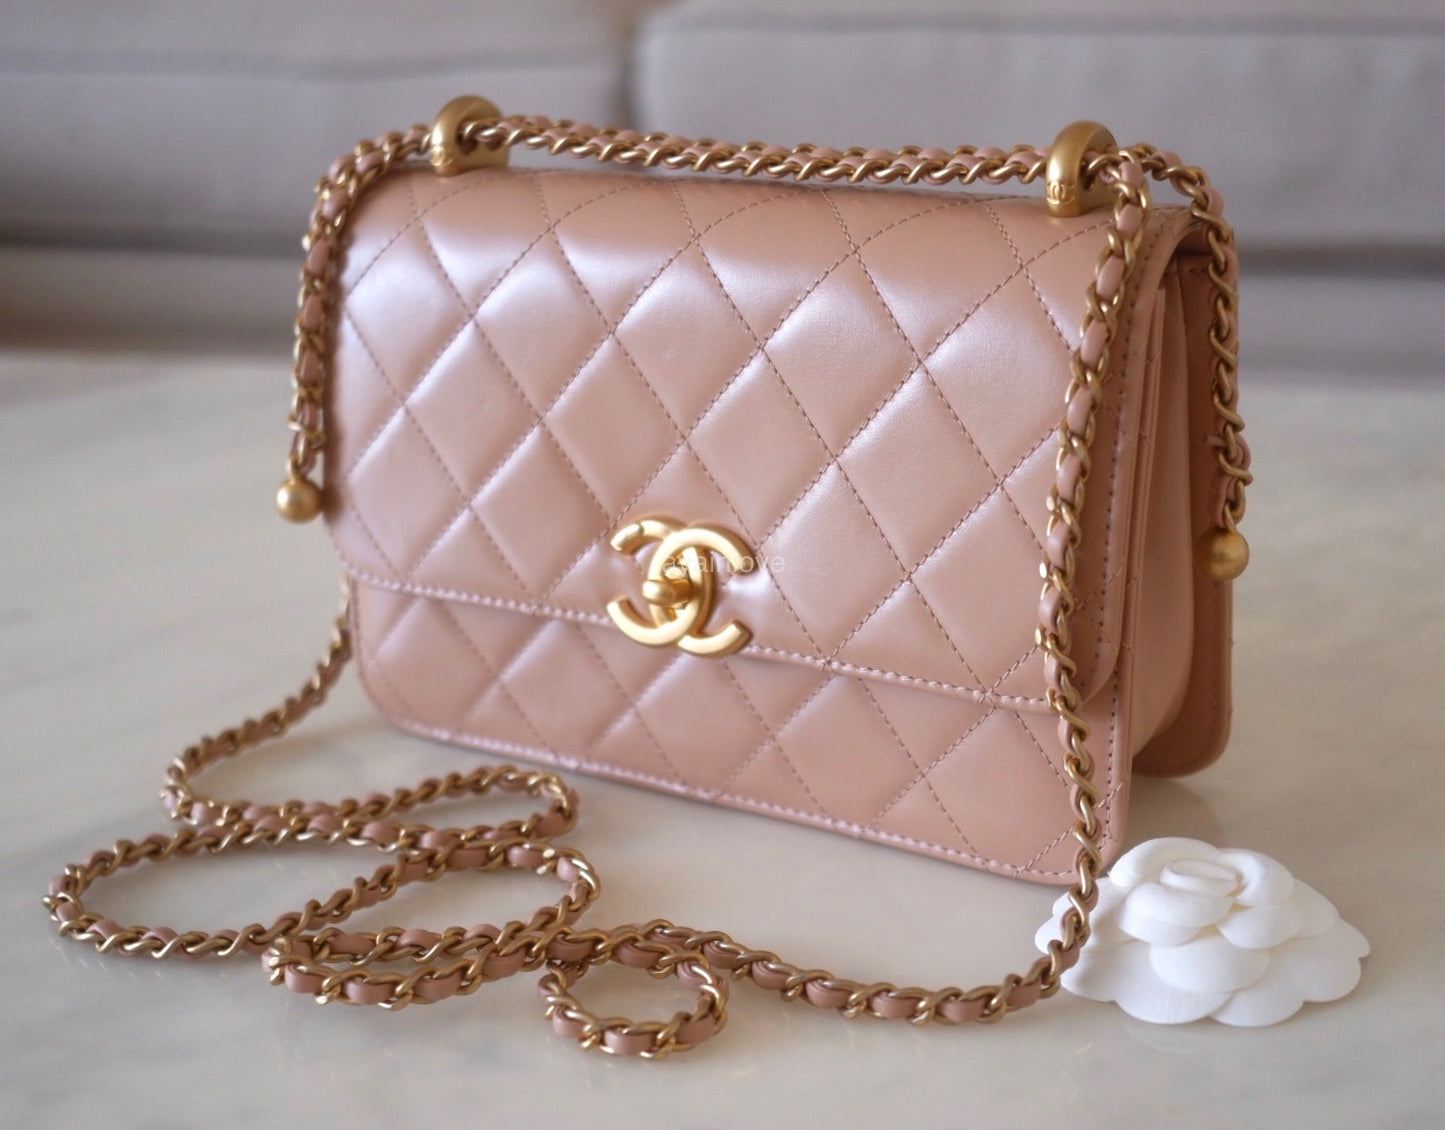 CHANEL, Bags, Chanel 2a Beige Lambskin Quilted Top Handle Mini Vanity  Case With Gold Chain